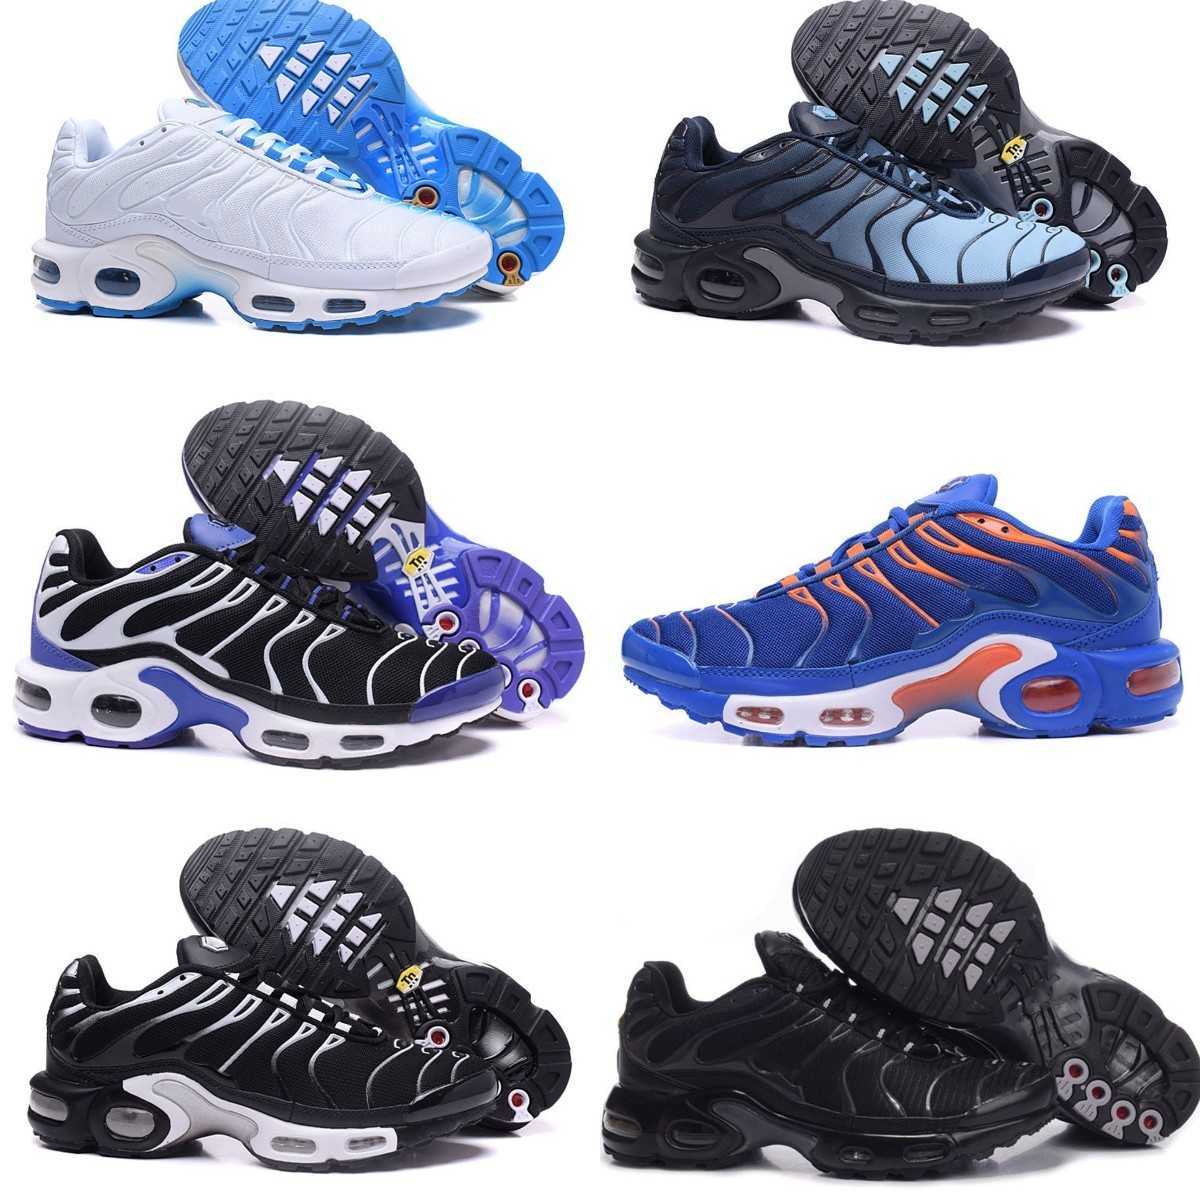 

2022 Mens Tn Running Shoes Tns OG Triple Black White Be True Max Plus Ultra Seafoam Grey Frost Pink Teal Volt Blue Crinkled Metal Outdoor Requin Designer Sneakers S68, Please contact us